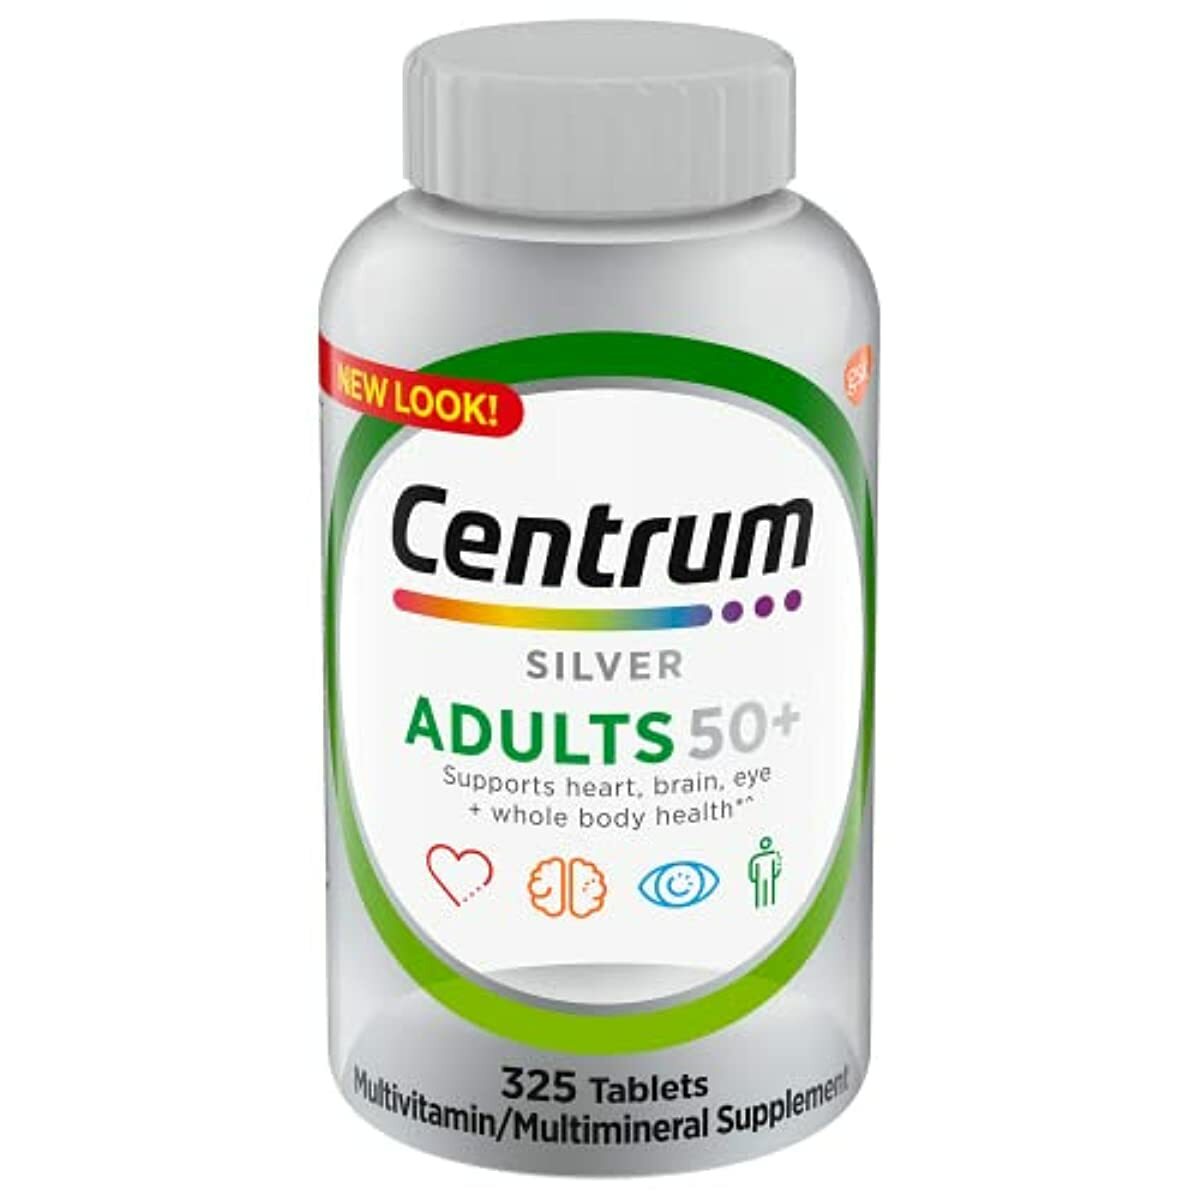 Centrum Silver Adult 50 Plus Daily Multivitamin 325 Count Specially Formulated for Adult 50+ Smooth Coating Higher Level of Vitamin D3 Non GMO Support Heart Brain Eye Muscle Health